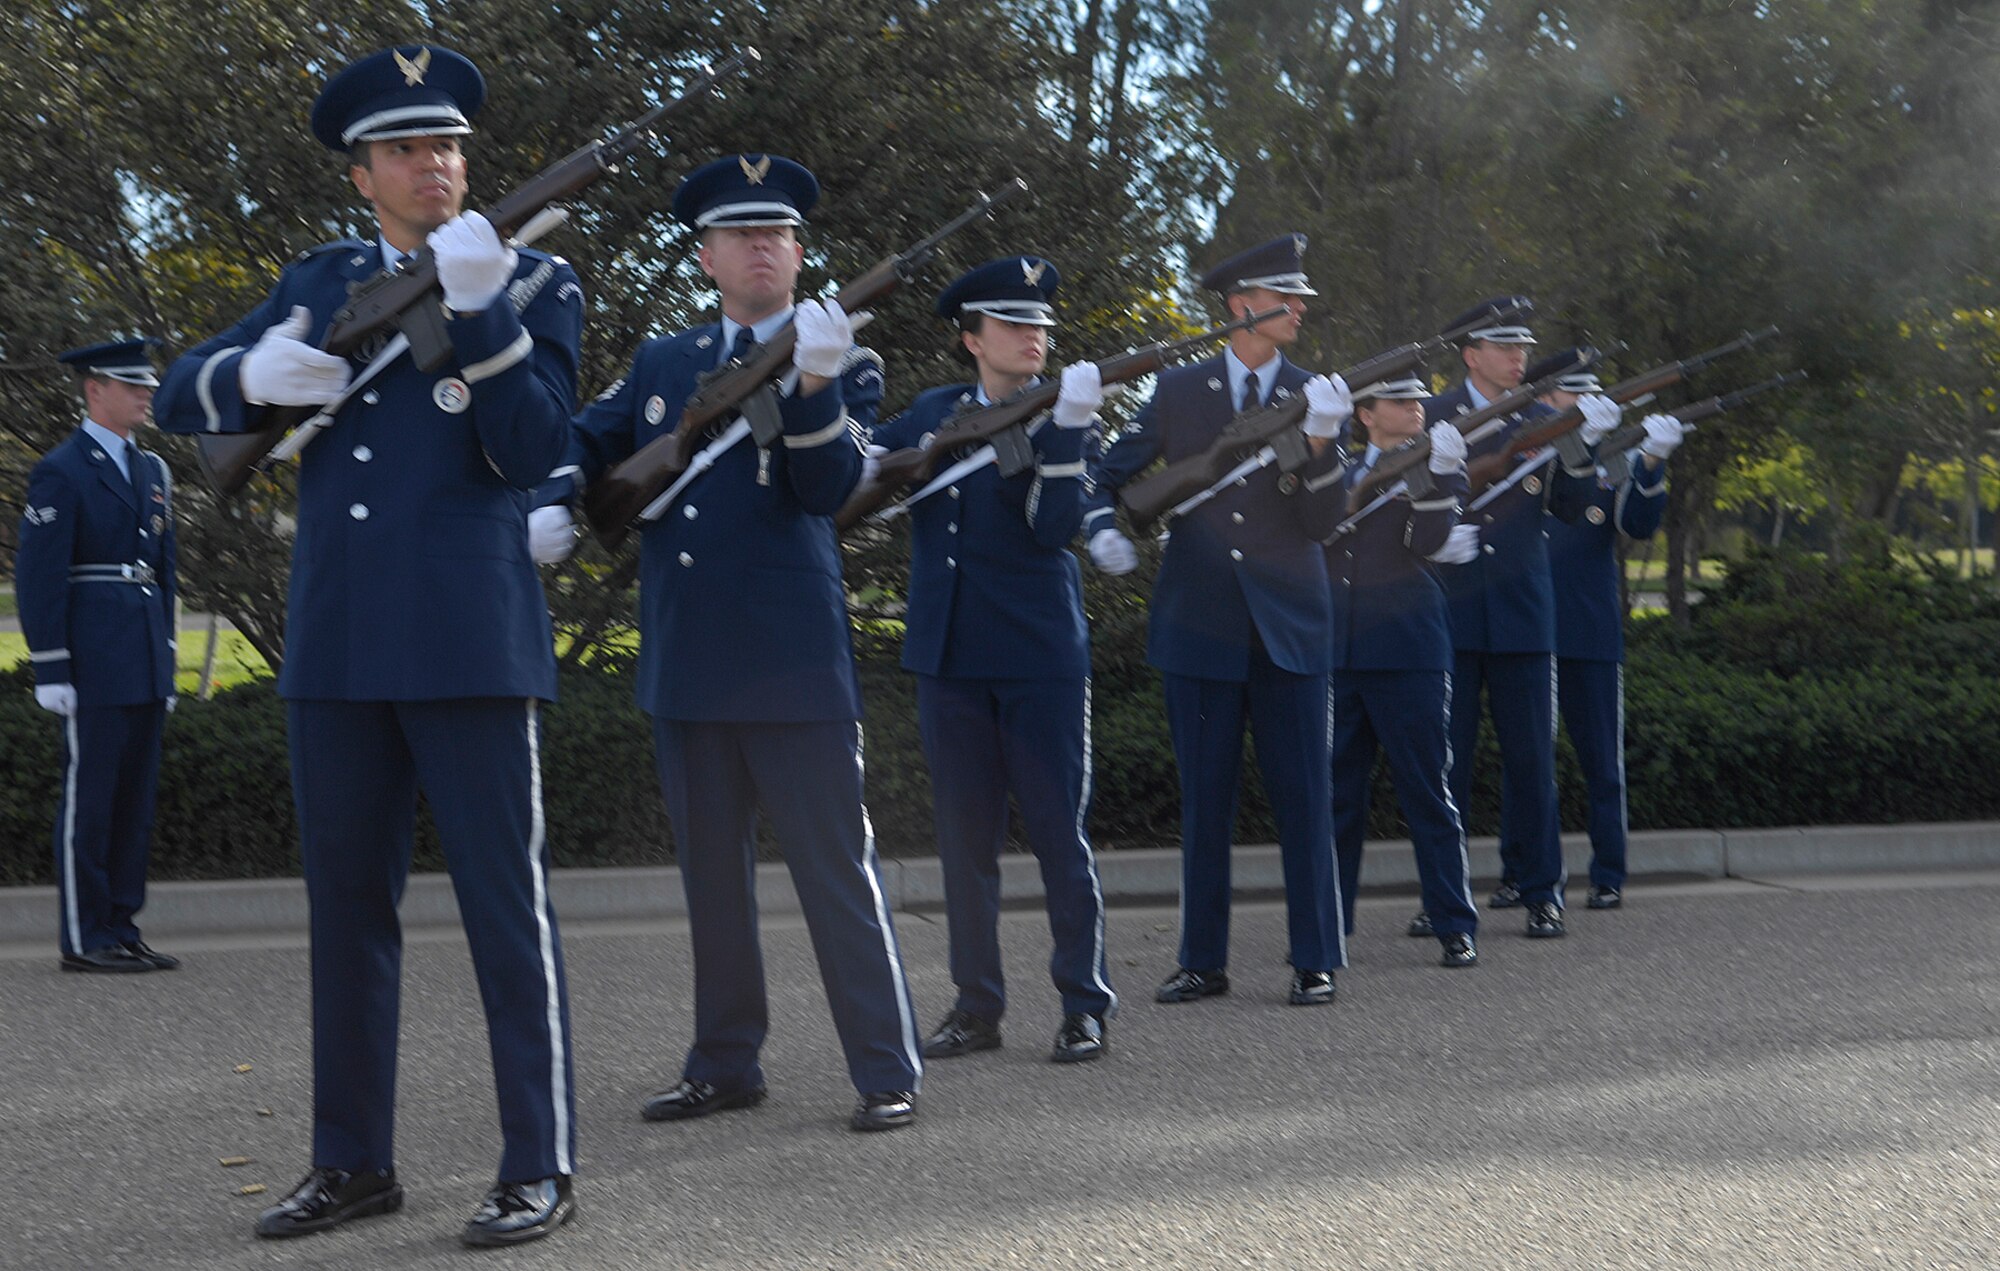 VANDENBERG AIR FORCE BASE, Calif. --  To honor the fallen Air Force security forces members, Vandenberg's Honor Guard provides a 21 gun salute during the 30th Security Forces Squadron's memorial ceremony here Tuesday, Nov. 10, 2009. The ceremony was in memory of two Airmen, 1st Lt. Joseph D. Helton and Airman 1st Class Jason D. Nathan, who made the ultimate sacrifice during their duties while deployed in support of Operation Iraqi Freedom. (U.S. Air Force photo/Airman 1st Class Andrew Lee) 
 